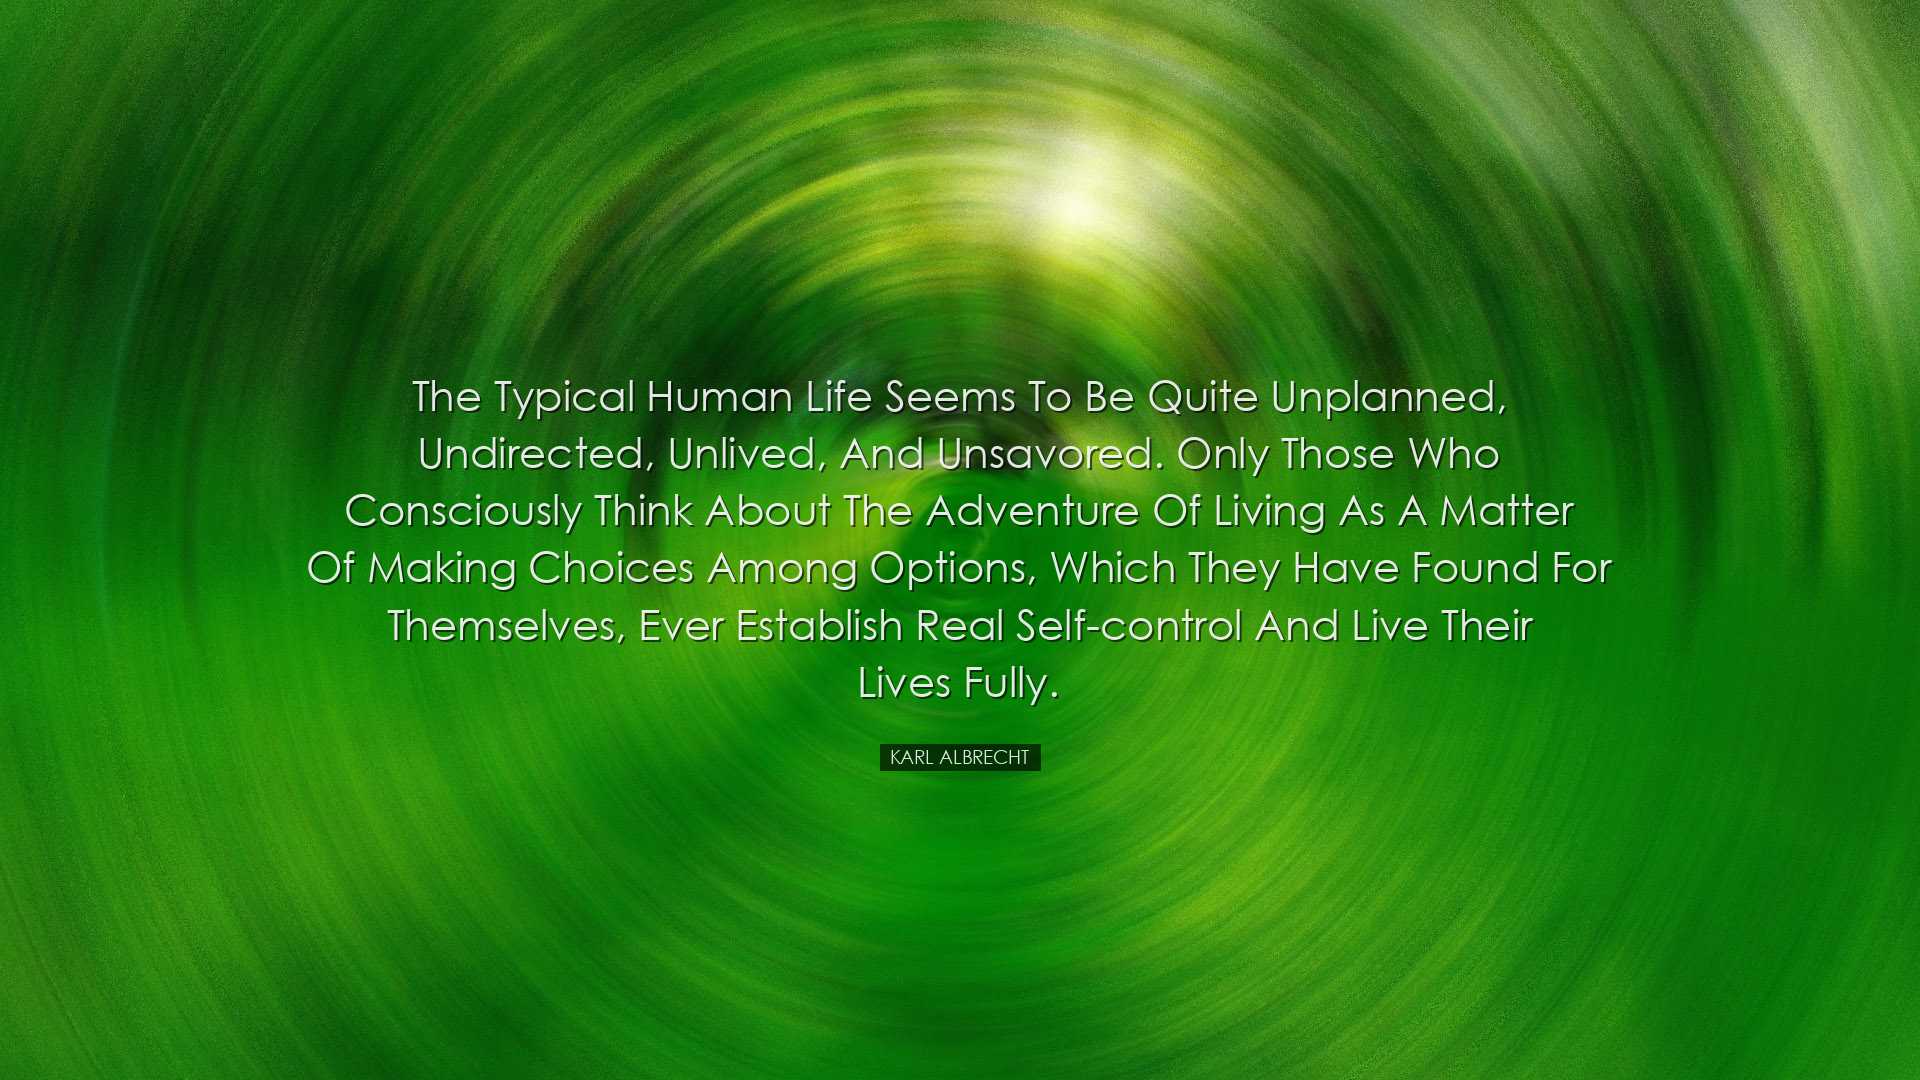 The typical human life seems to be quite unplanned, undirected, un